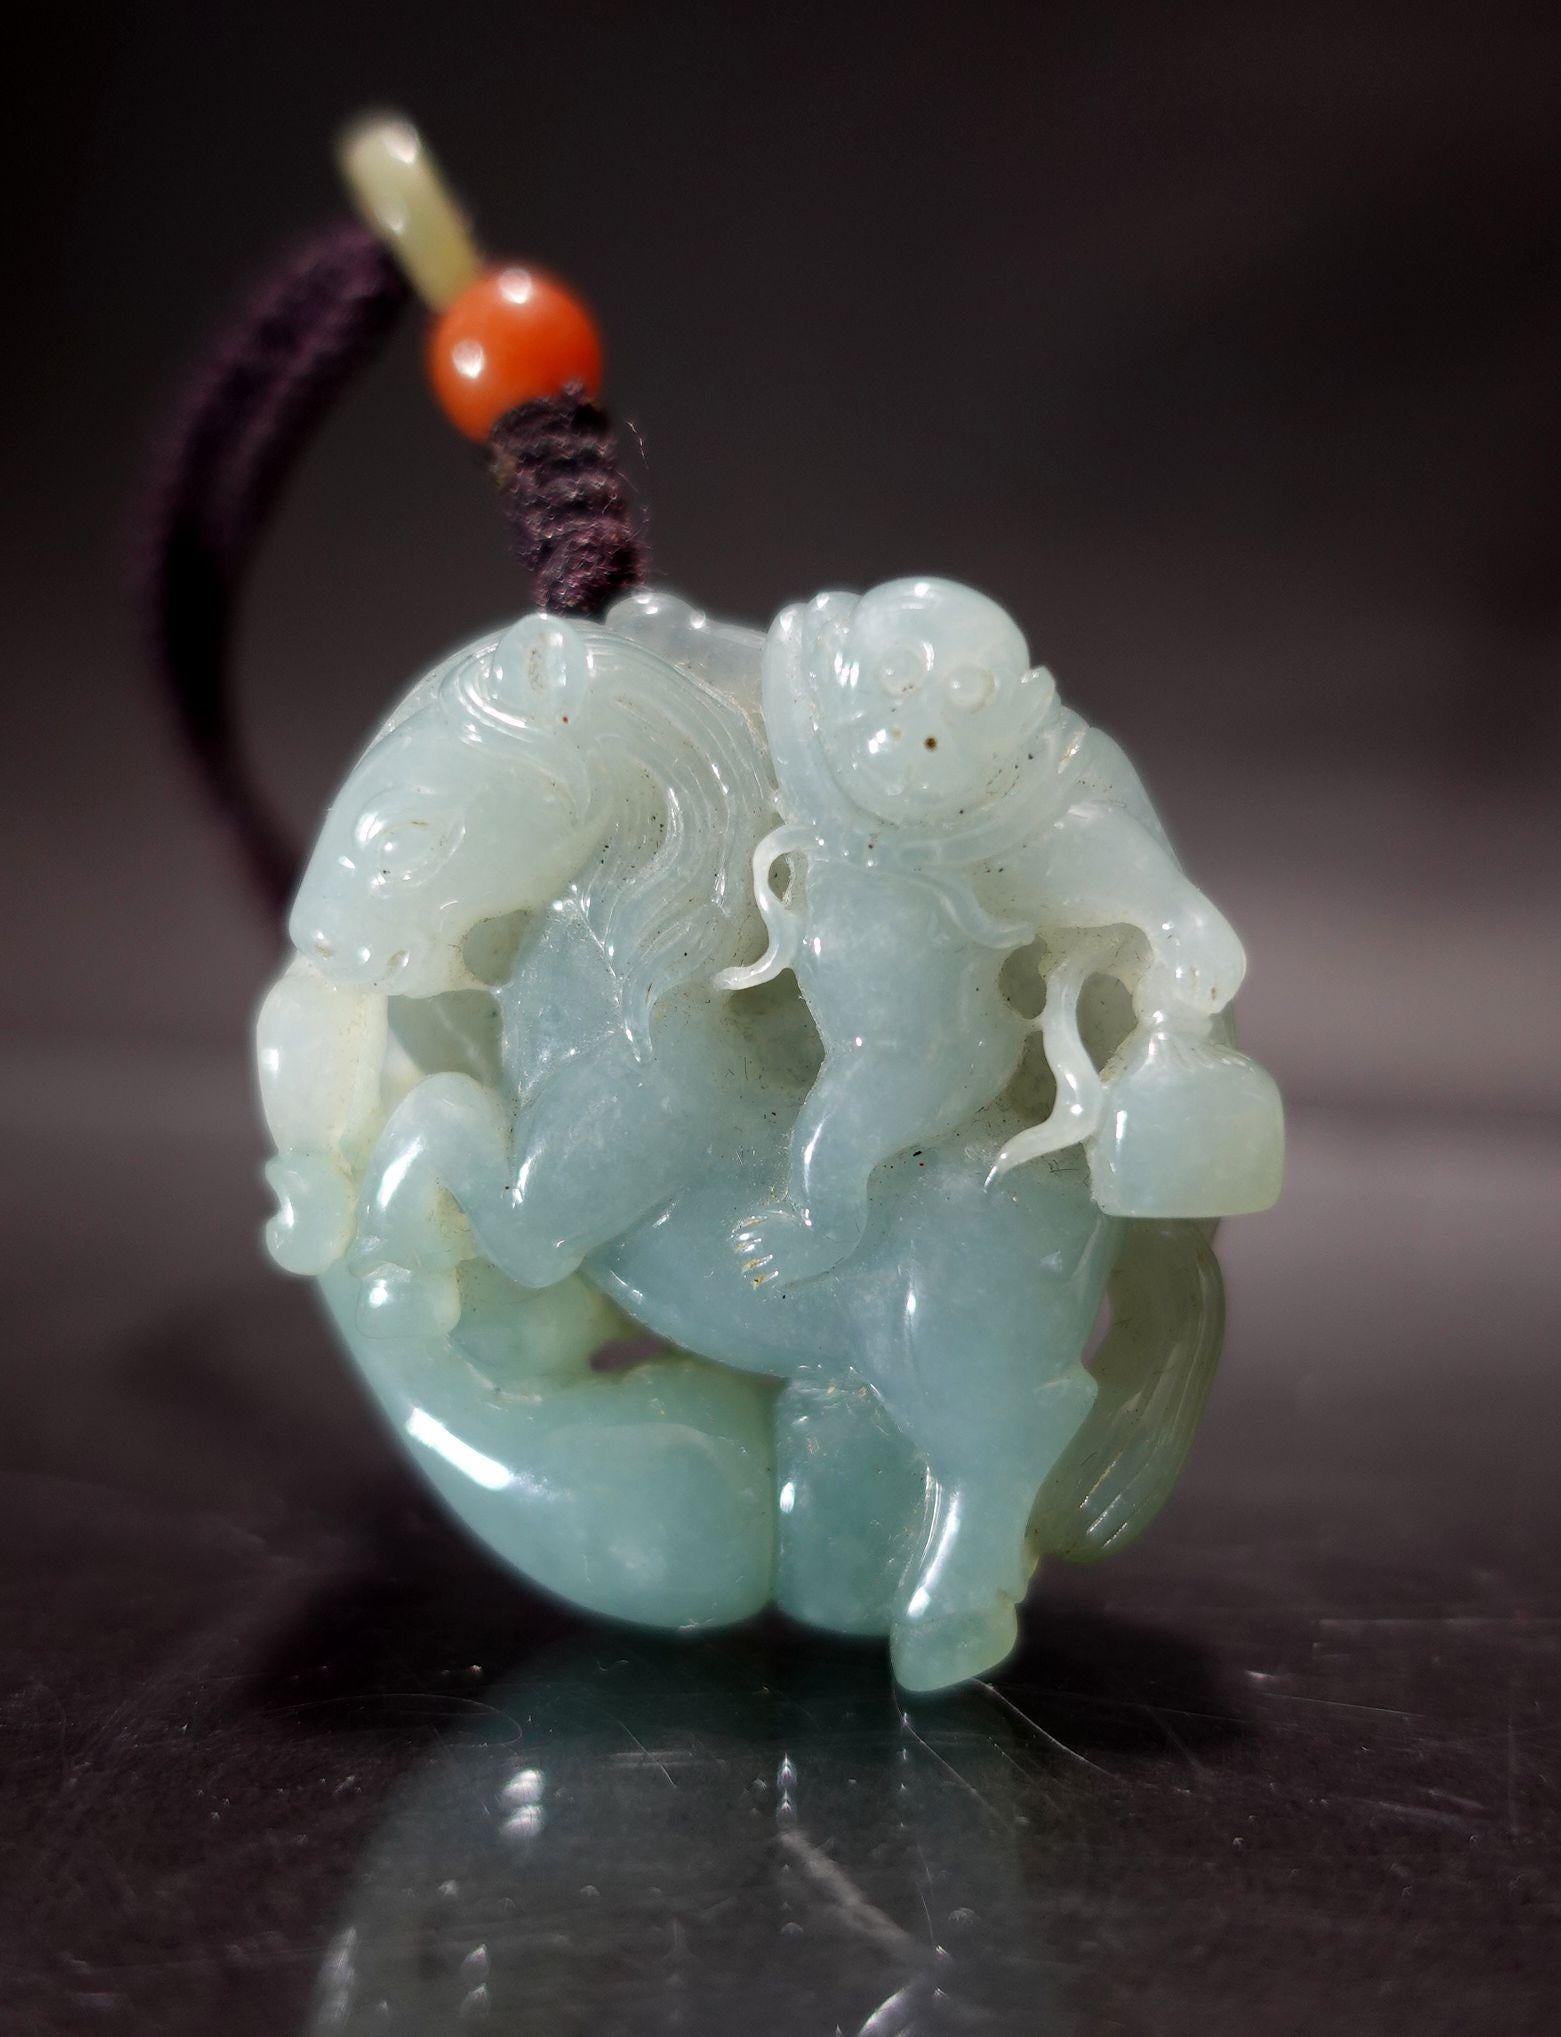 This is hand-carved loverly jadeite with a color of light blue. It's an oval shape and almost round. You may think it's a pendant, but in reality is a 360° carving with a Monkey riding a horse. Its meaning in the Chinese ancient culture depicts